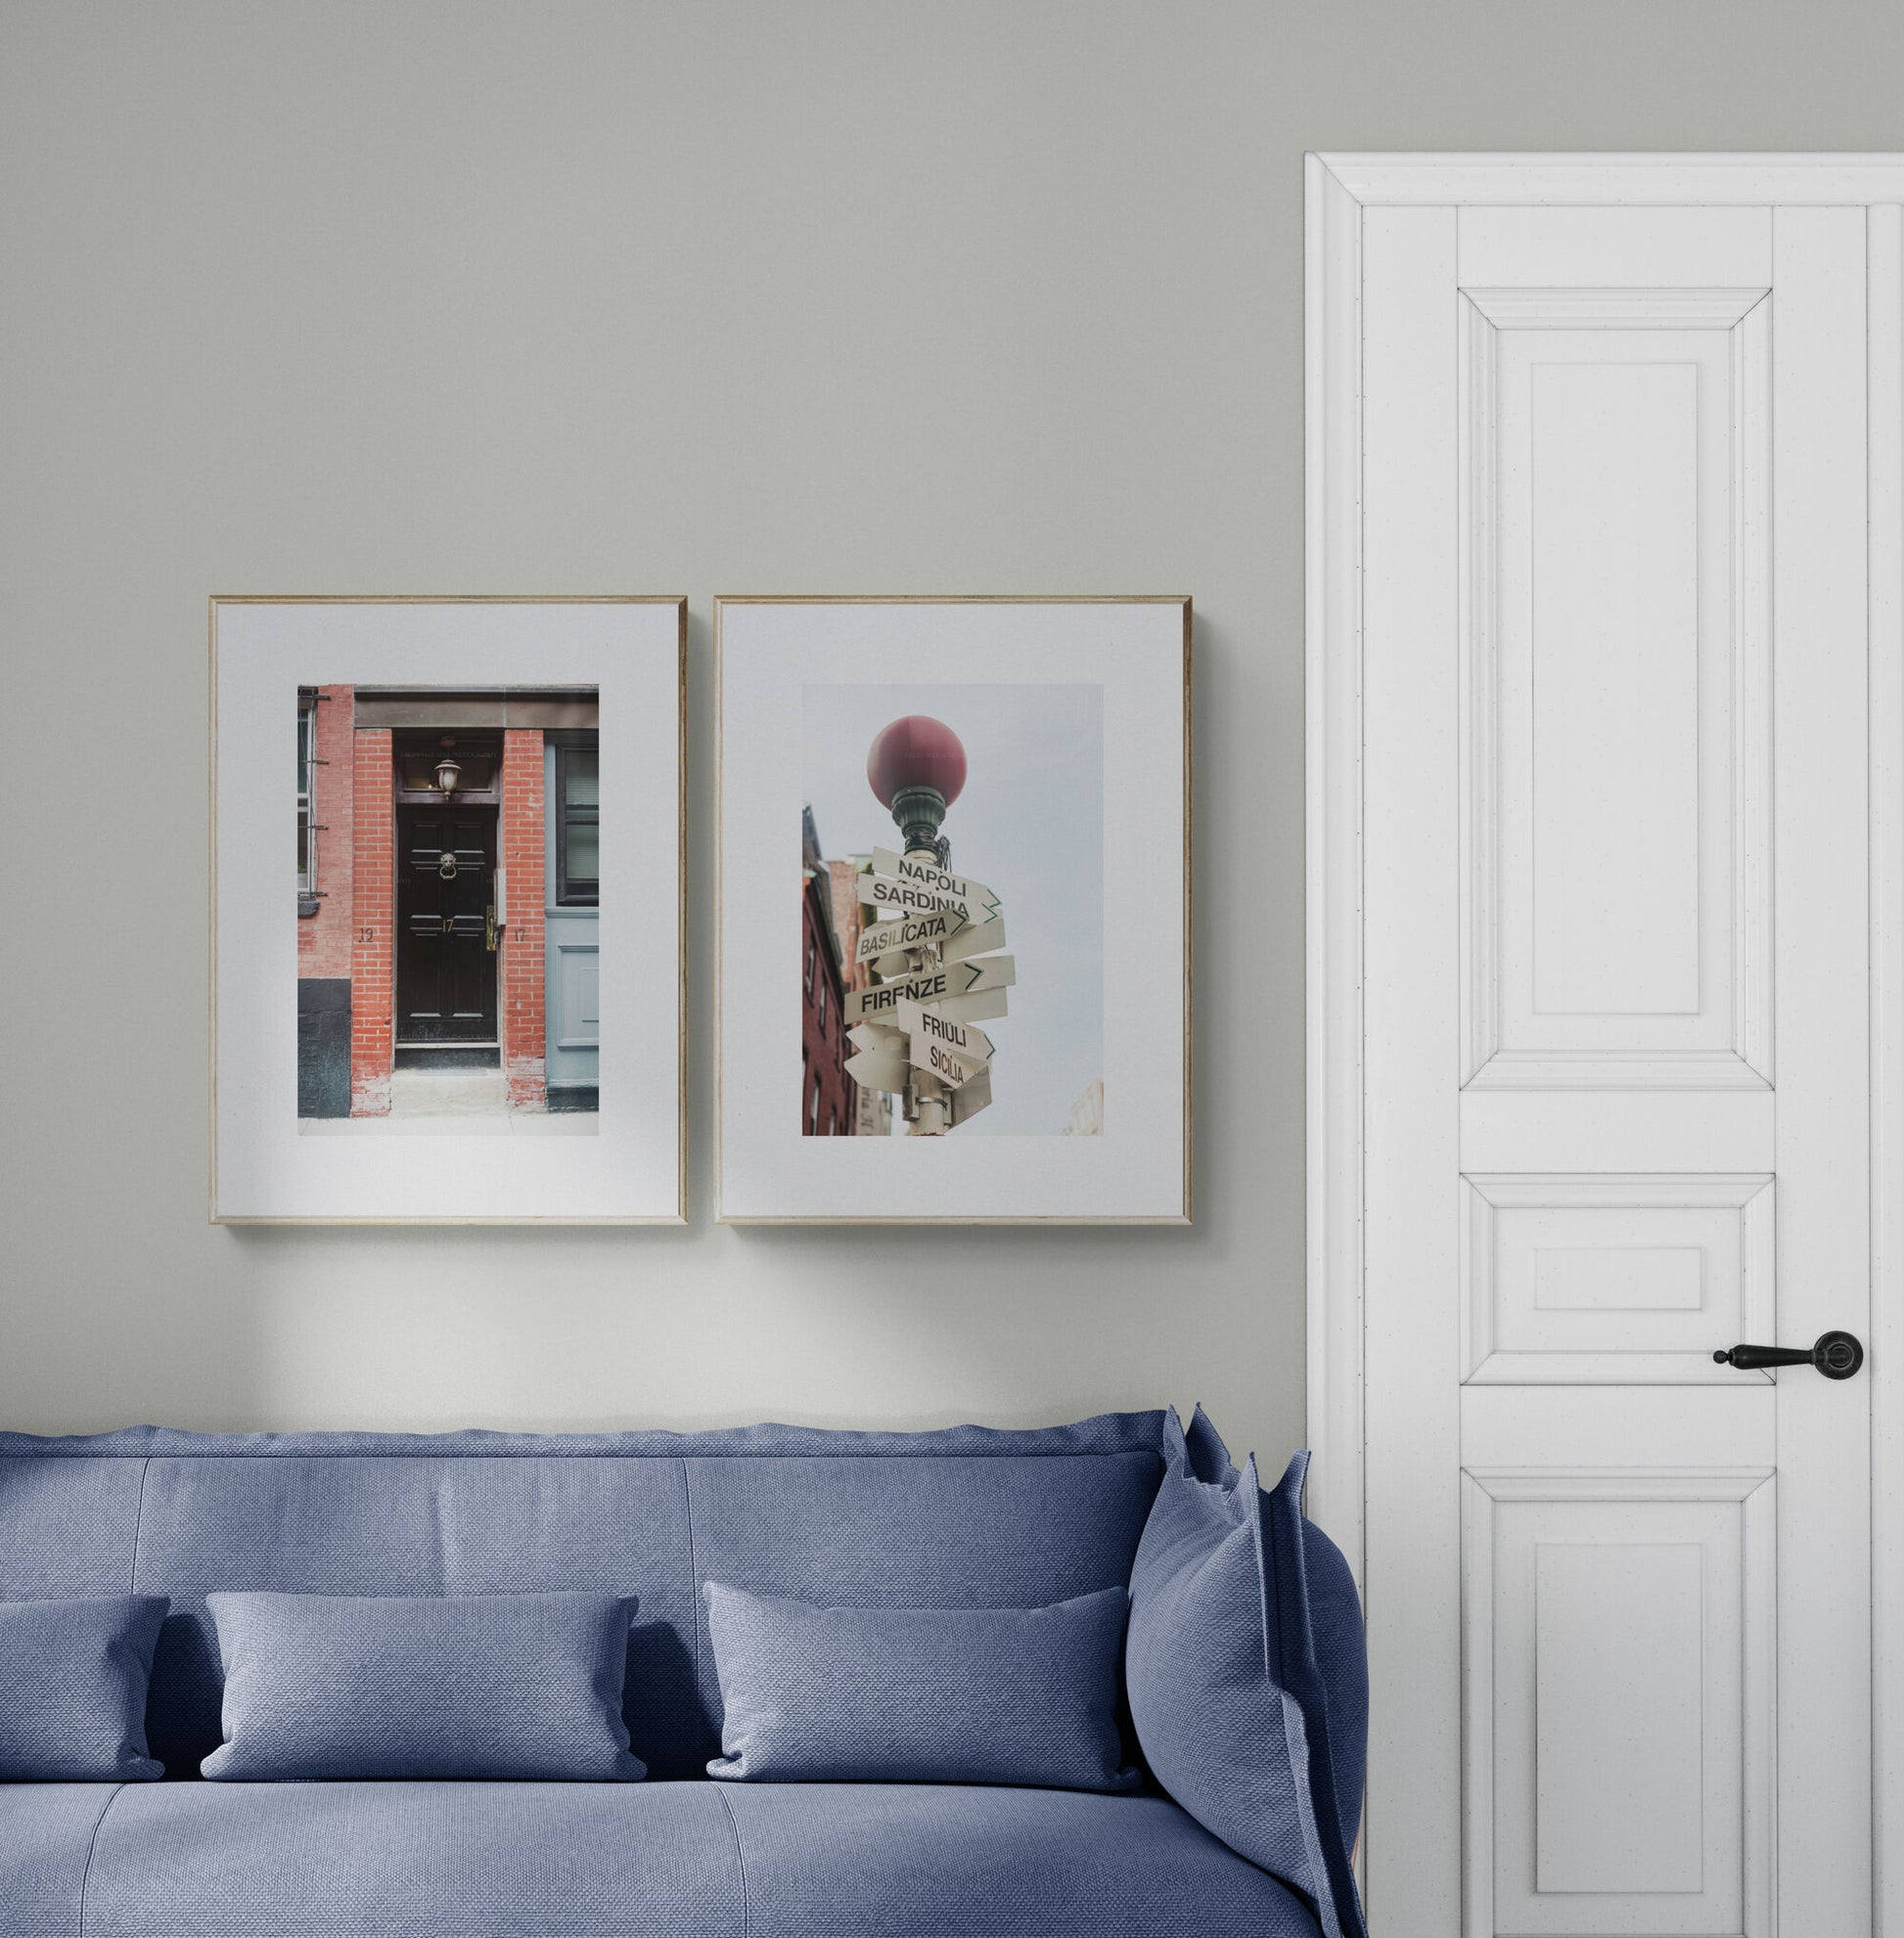 Photograph of Directions to Italy in Boston North End and Door as Wall Art in an apartment